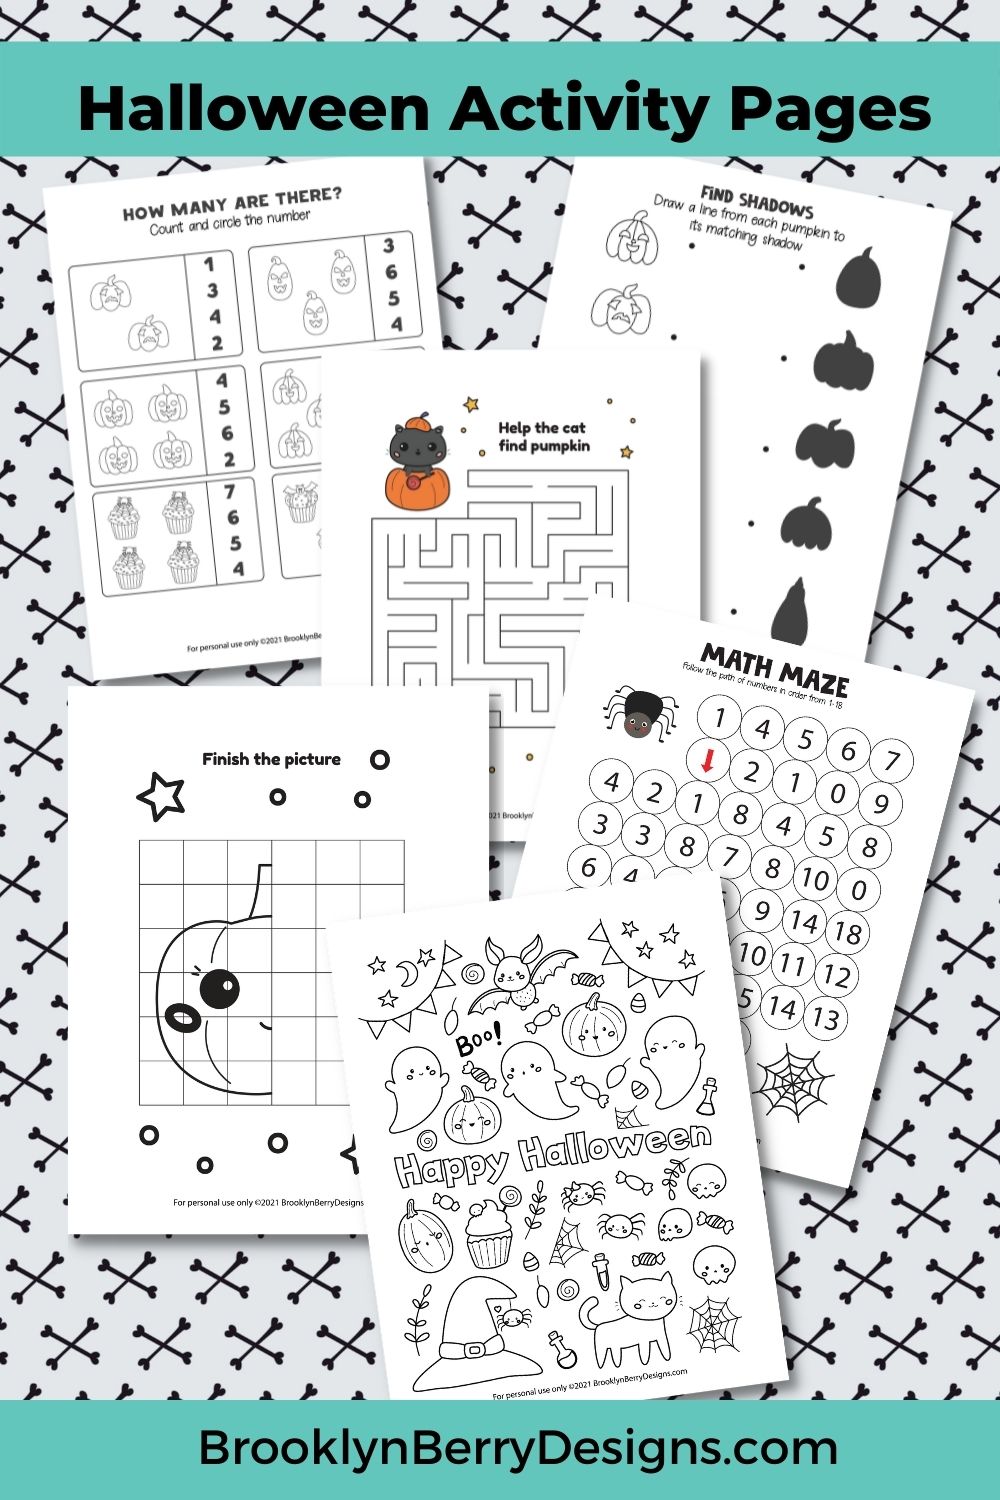 Download, print and play with these free printable Kids Halloween Activity Pages. They include color by number, mazes, and more! via @brookeberry